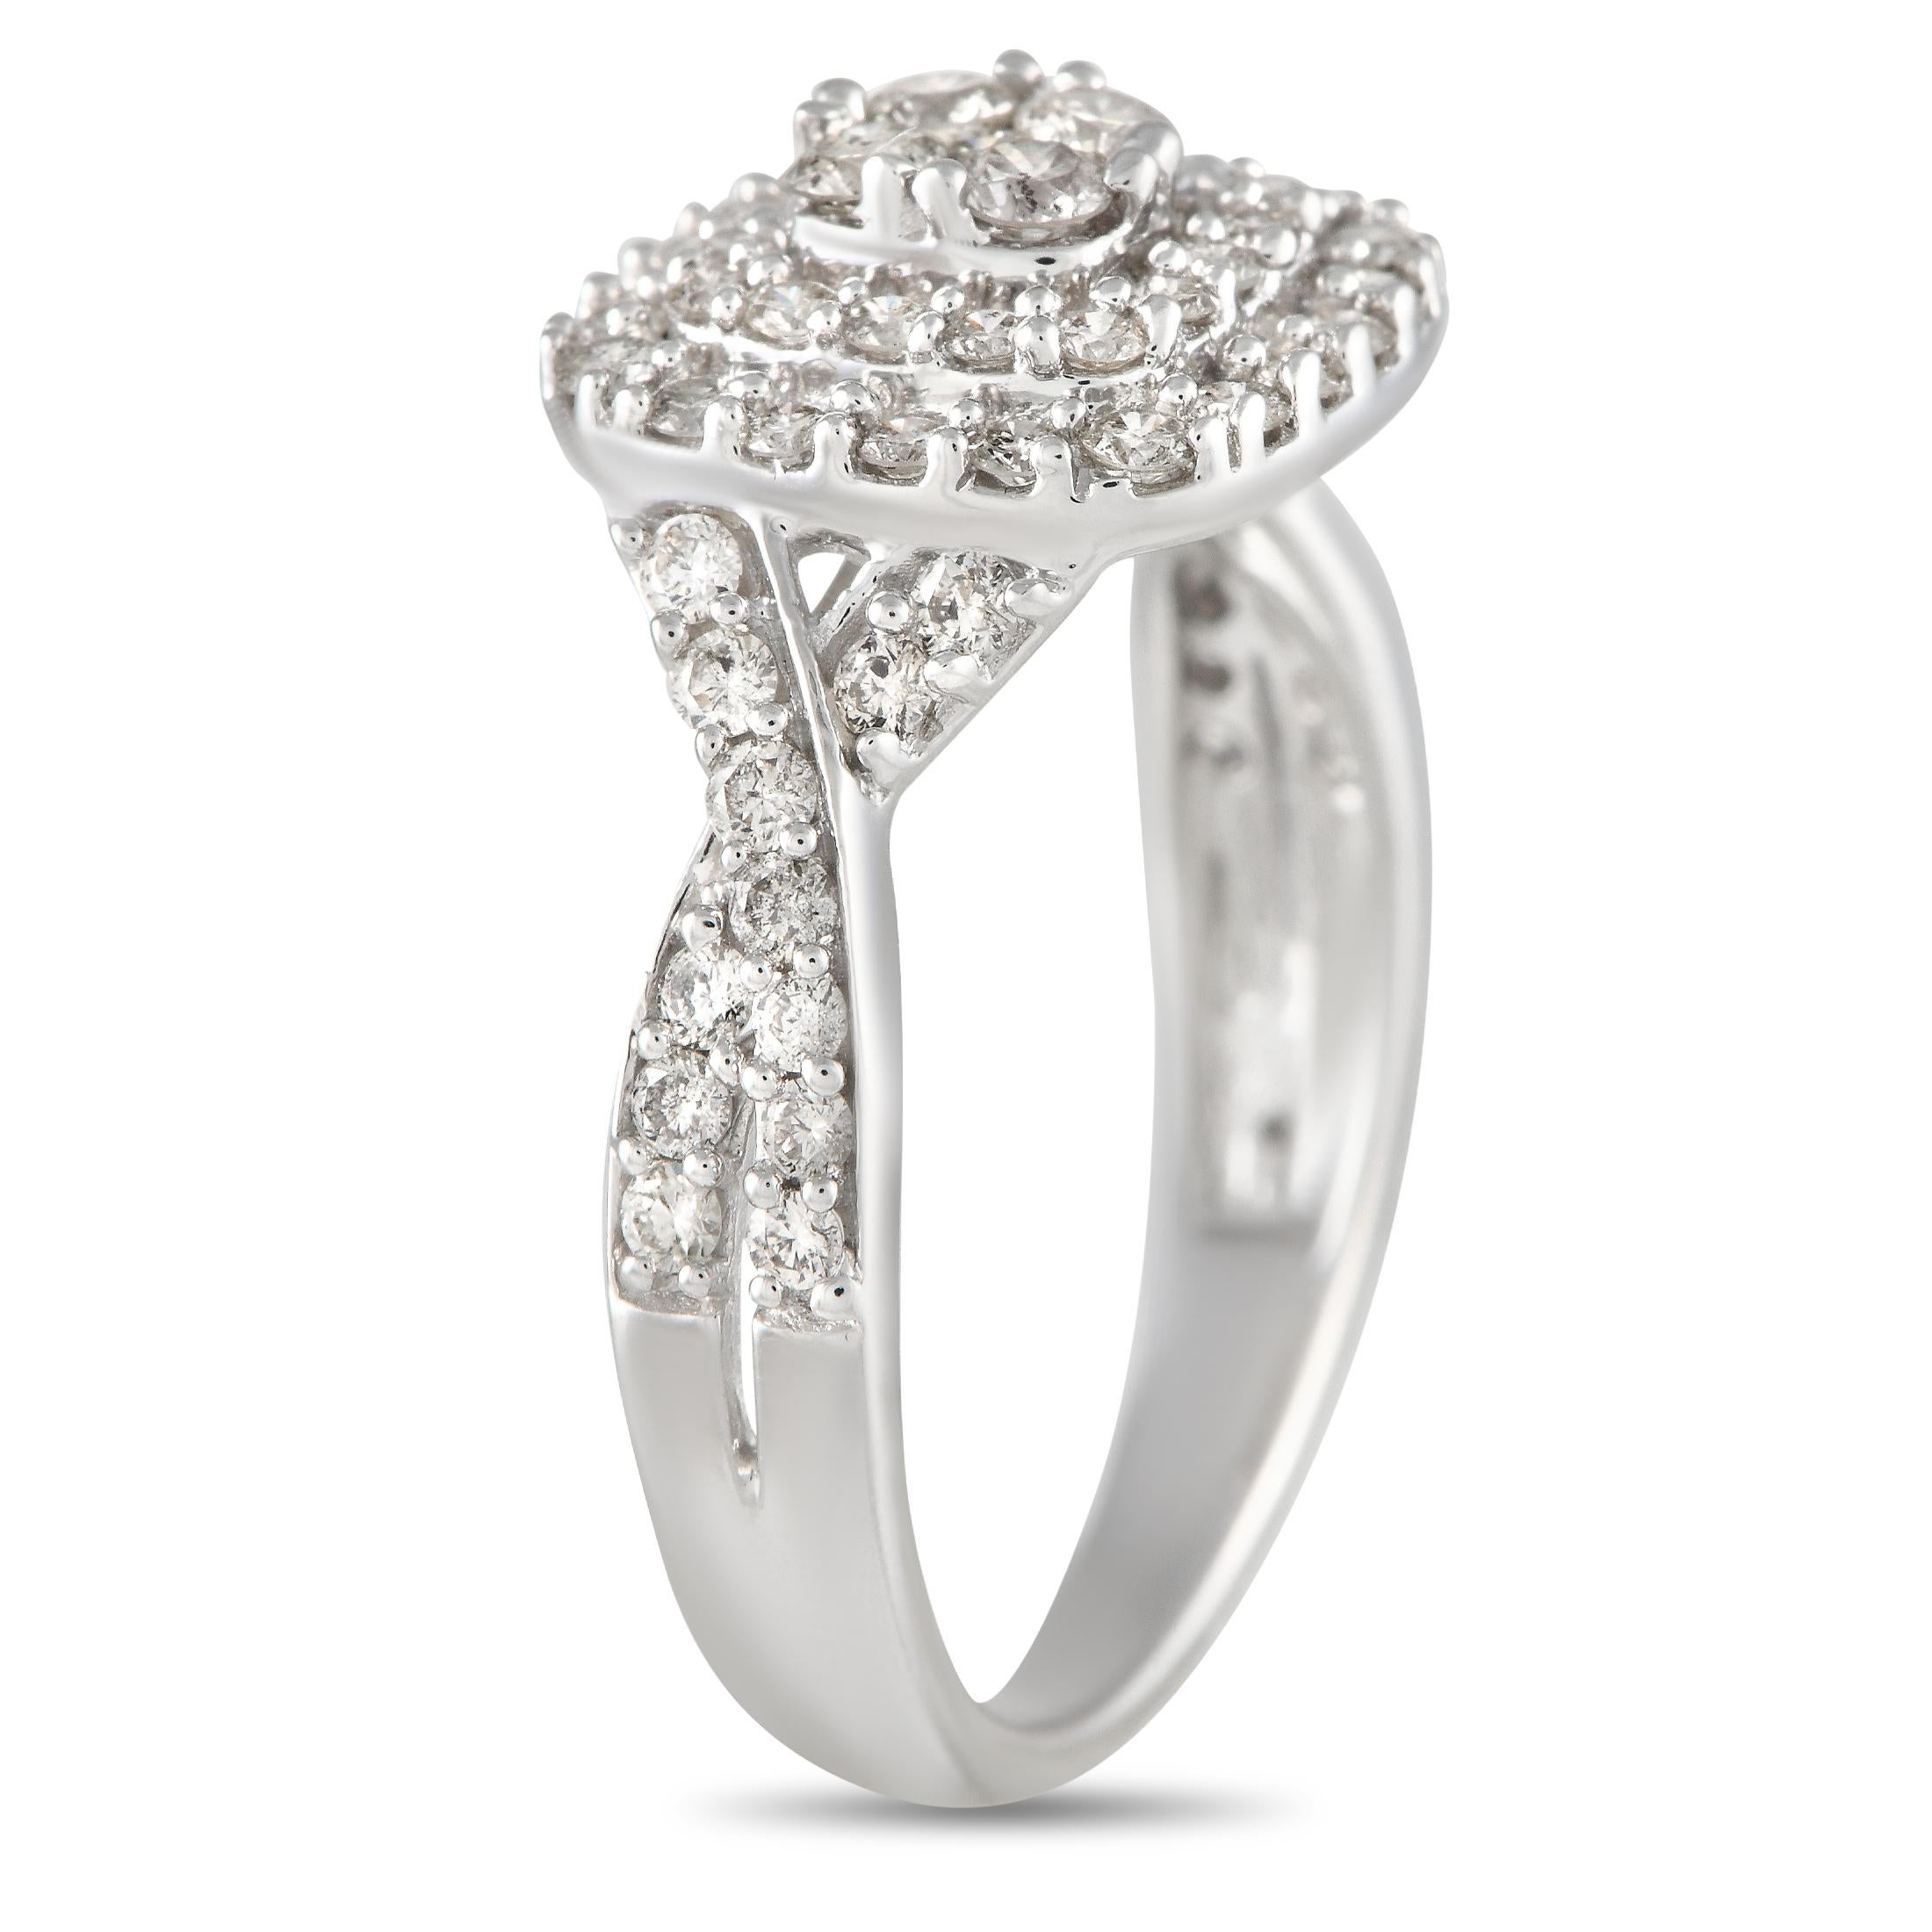 A beautiful diamond ring designed with the perfect blend of regal beauty and retro aesthetics. This 14K white gold ring has a 3mm-thick band with twisted shoulders traced with round diamonds. They lead to tiered cushion-shaped halos of more